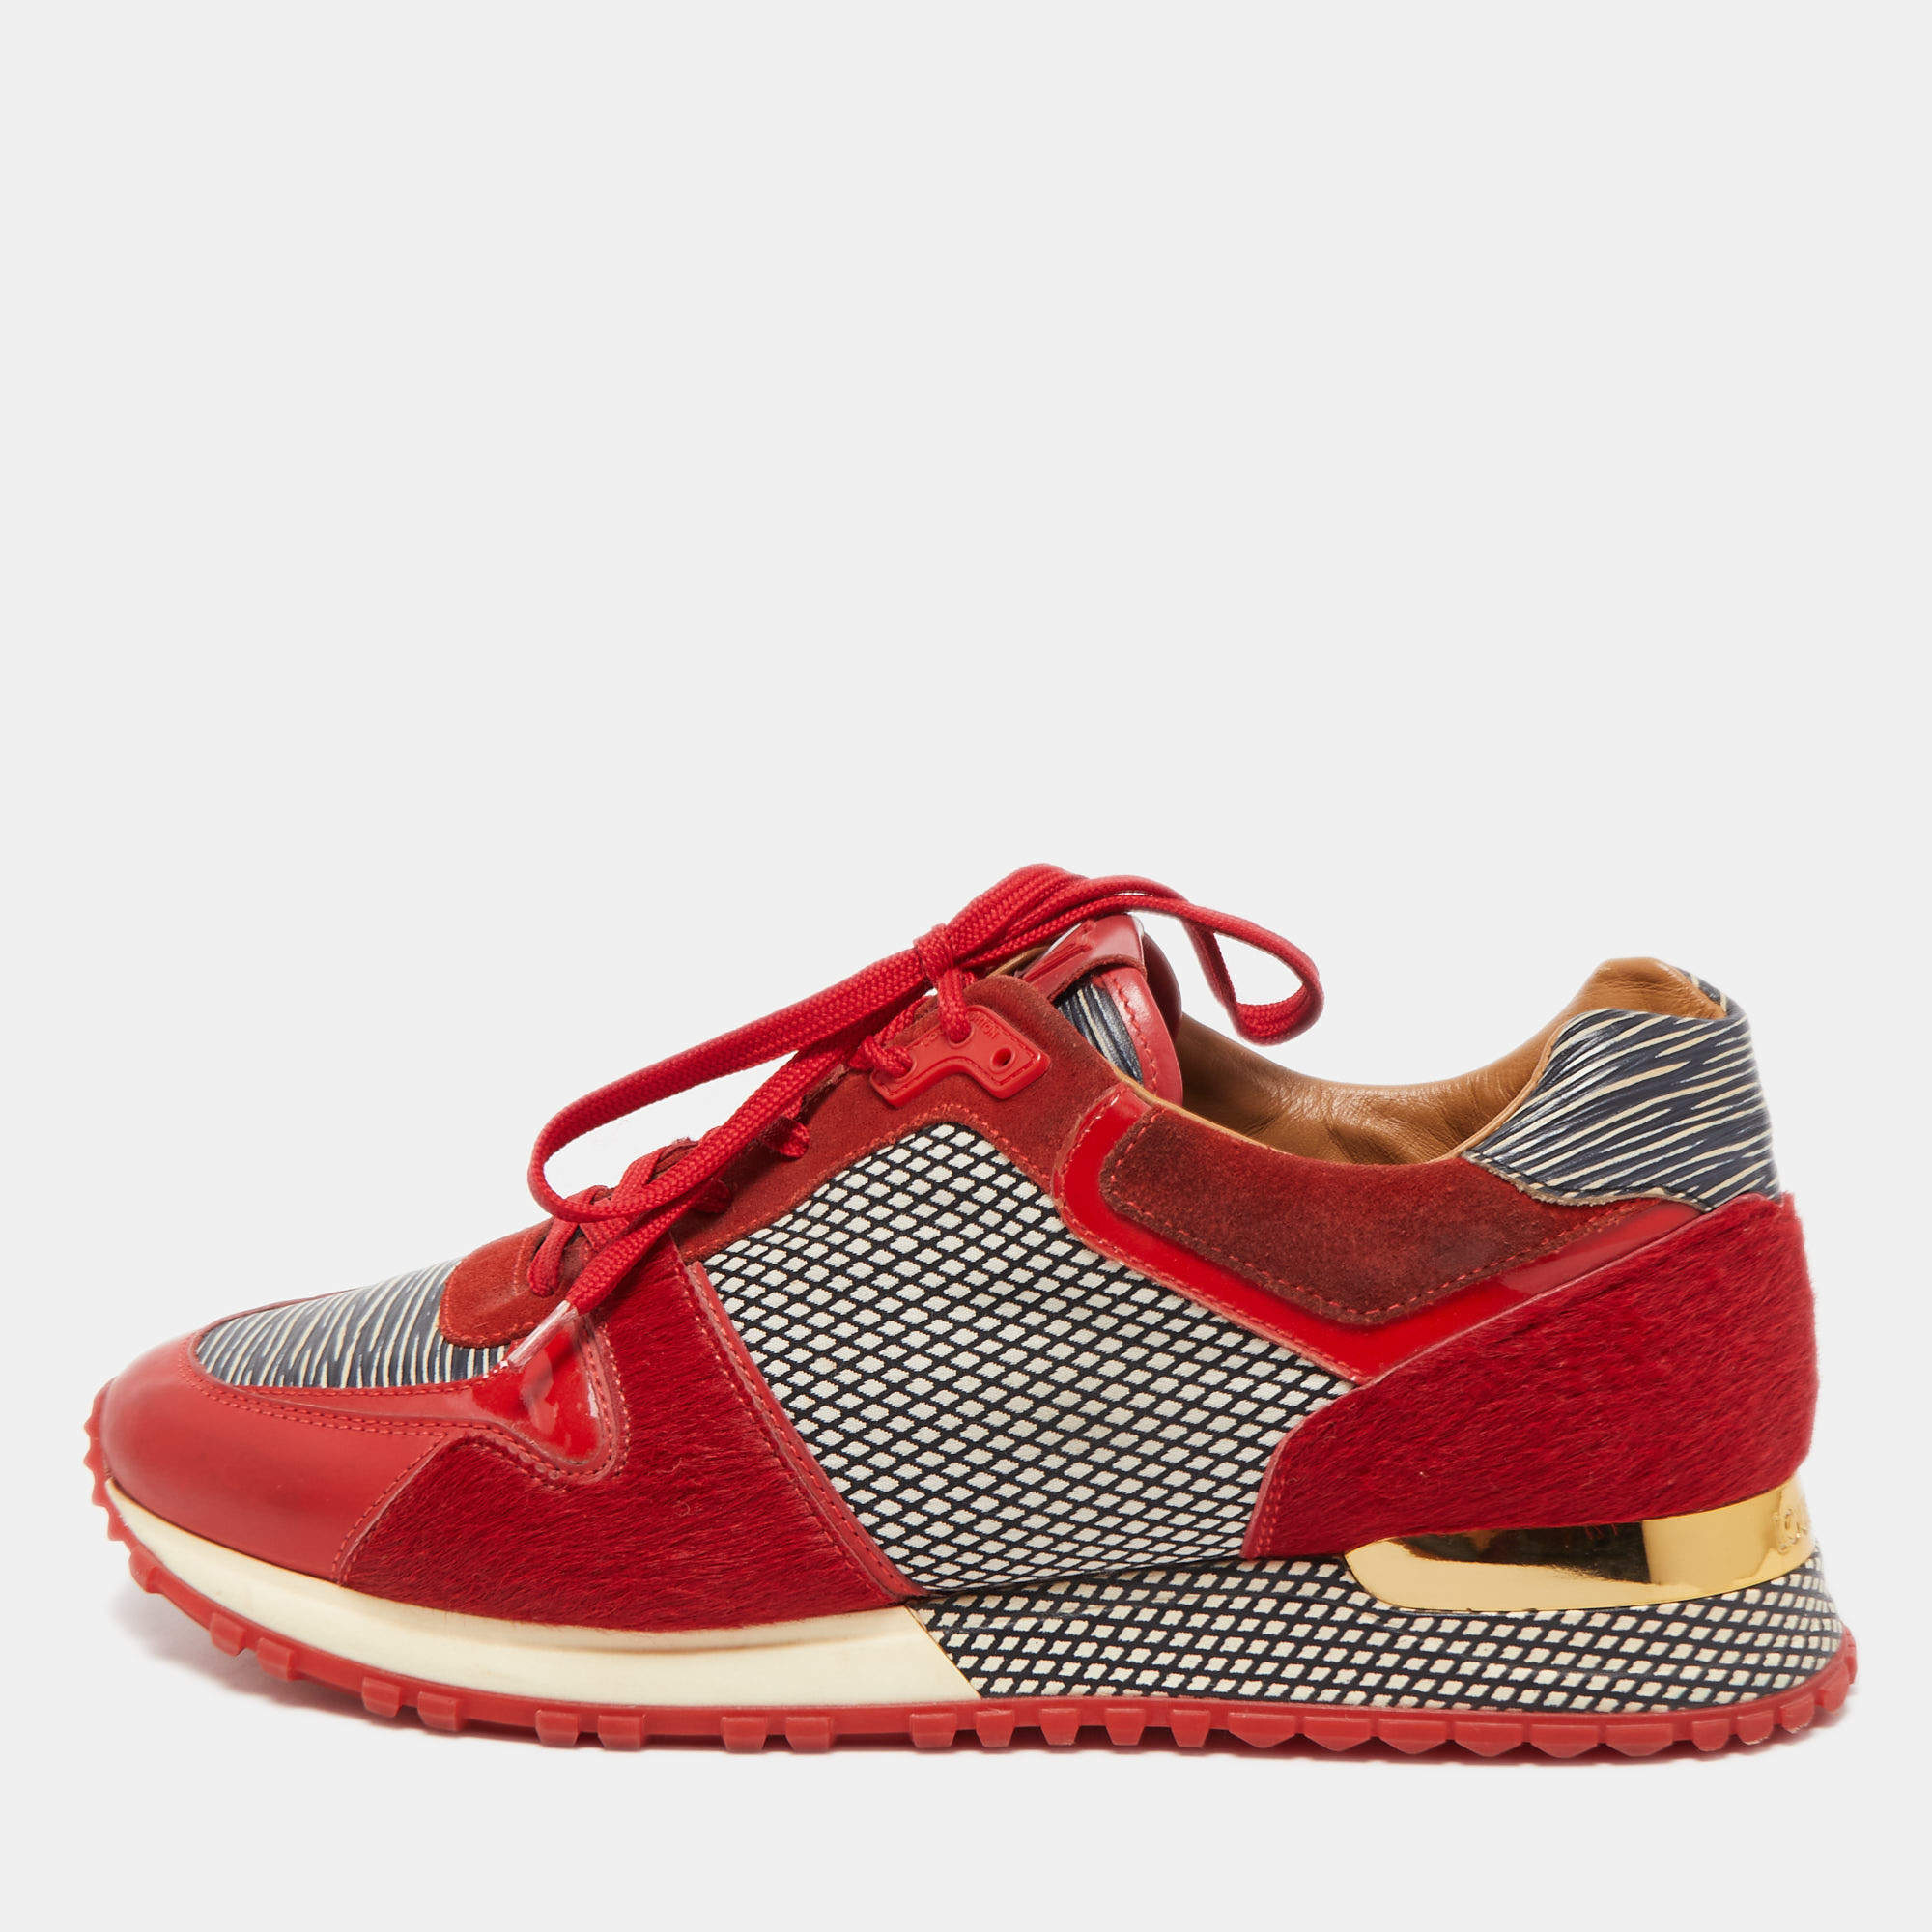 louis vuitton red sneakers